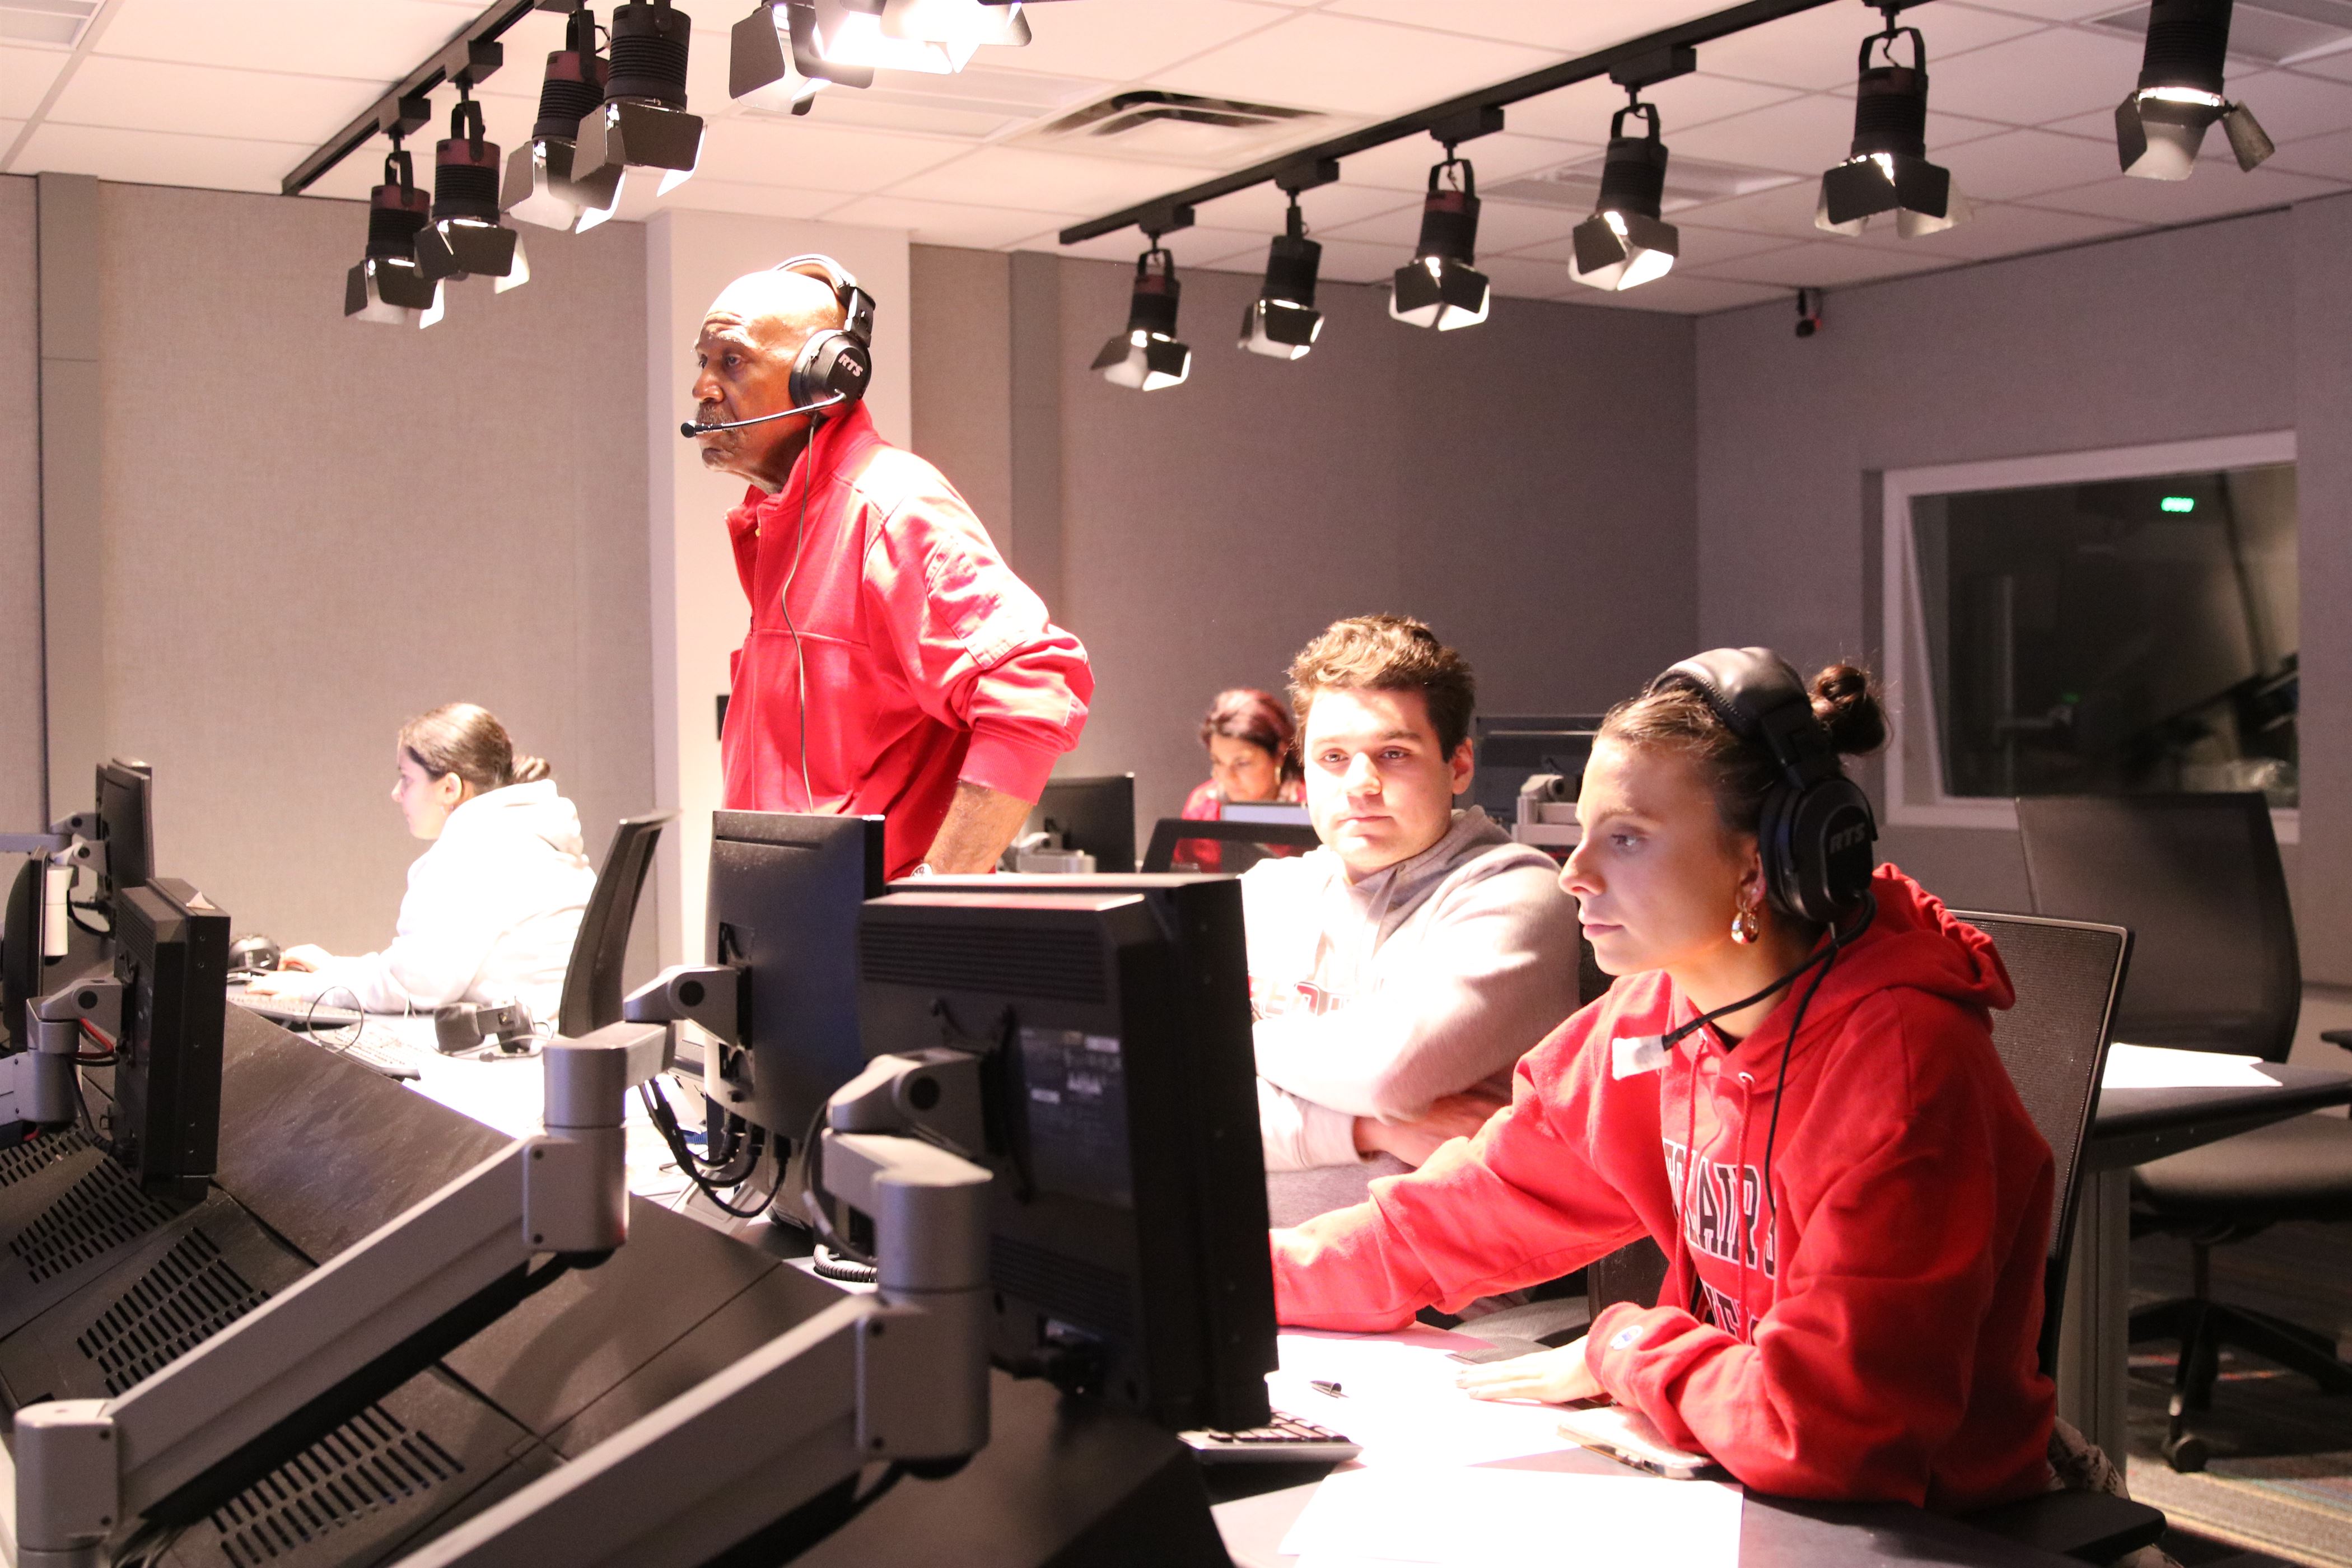 The control room, led by Professor Vernard Gantt, watches as they set up for the broadcast. Photo courtesy of Maria Barbieri.